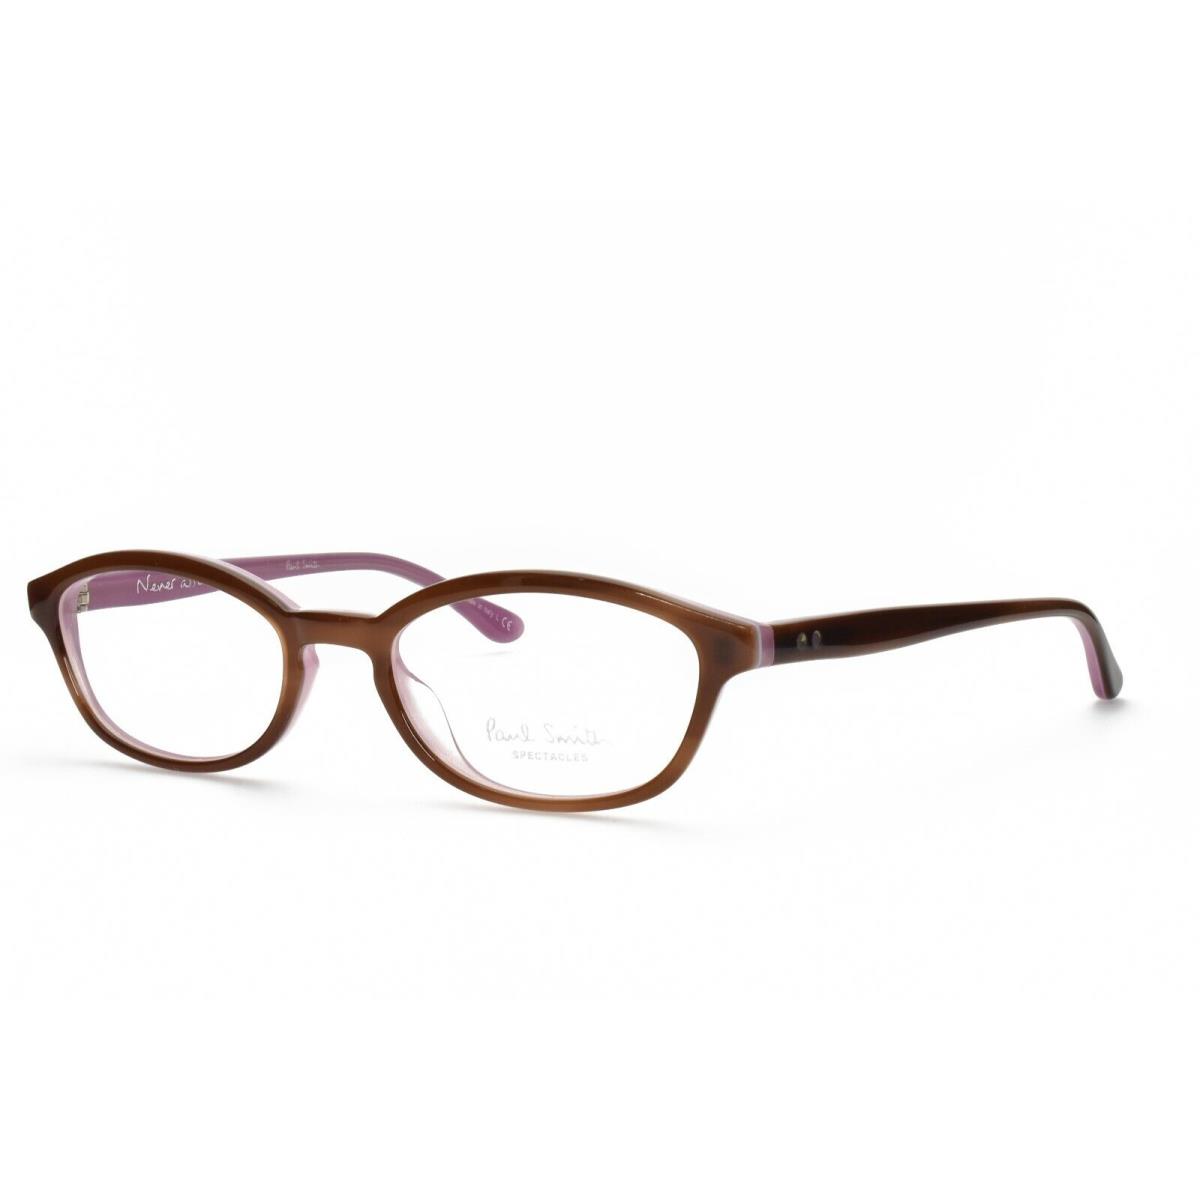 Paul Smith PS Maisie 8159 1215 Eyeglasses Frames Only 49-18-140